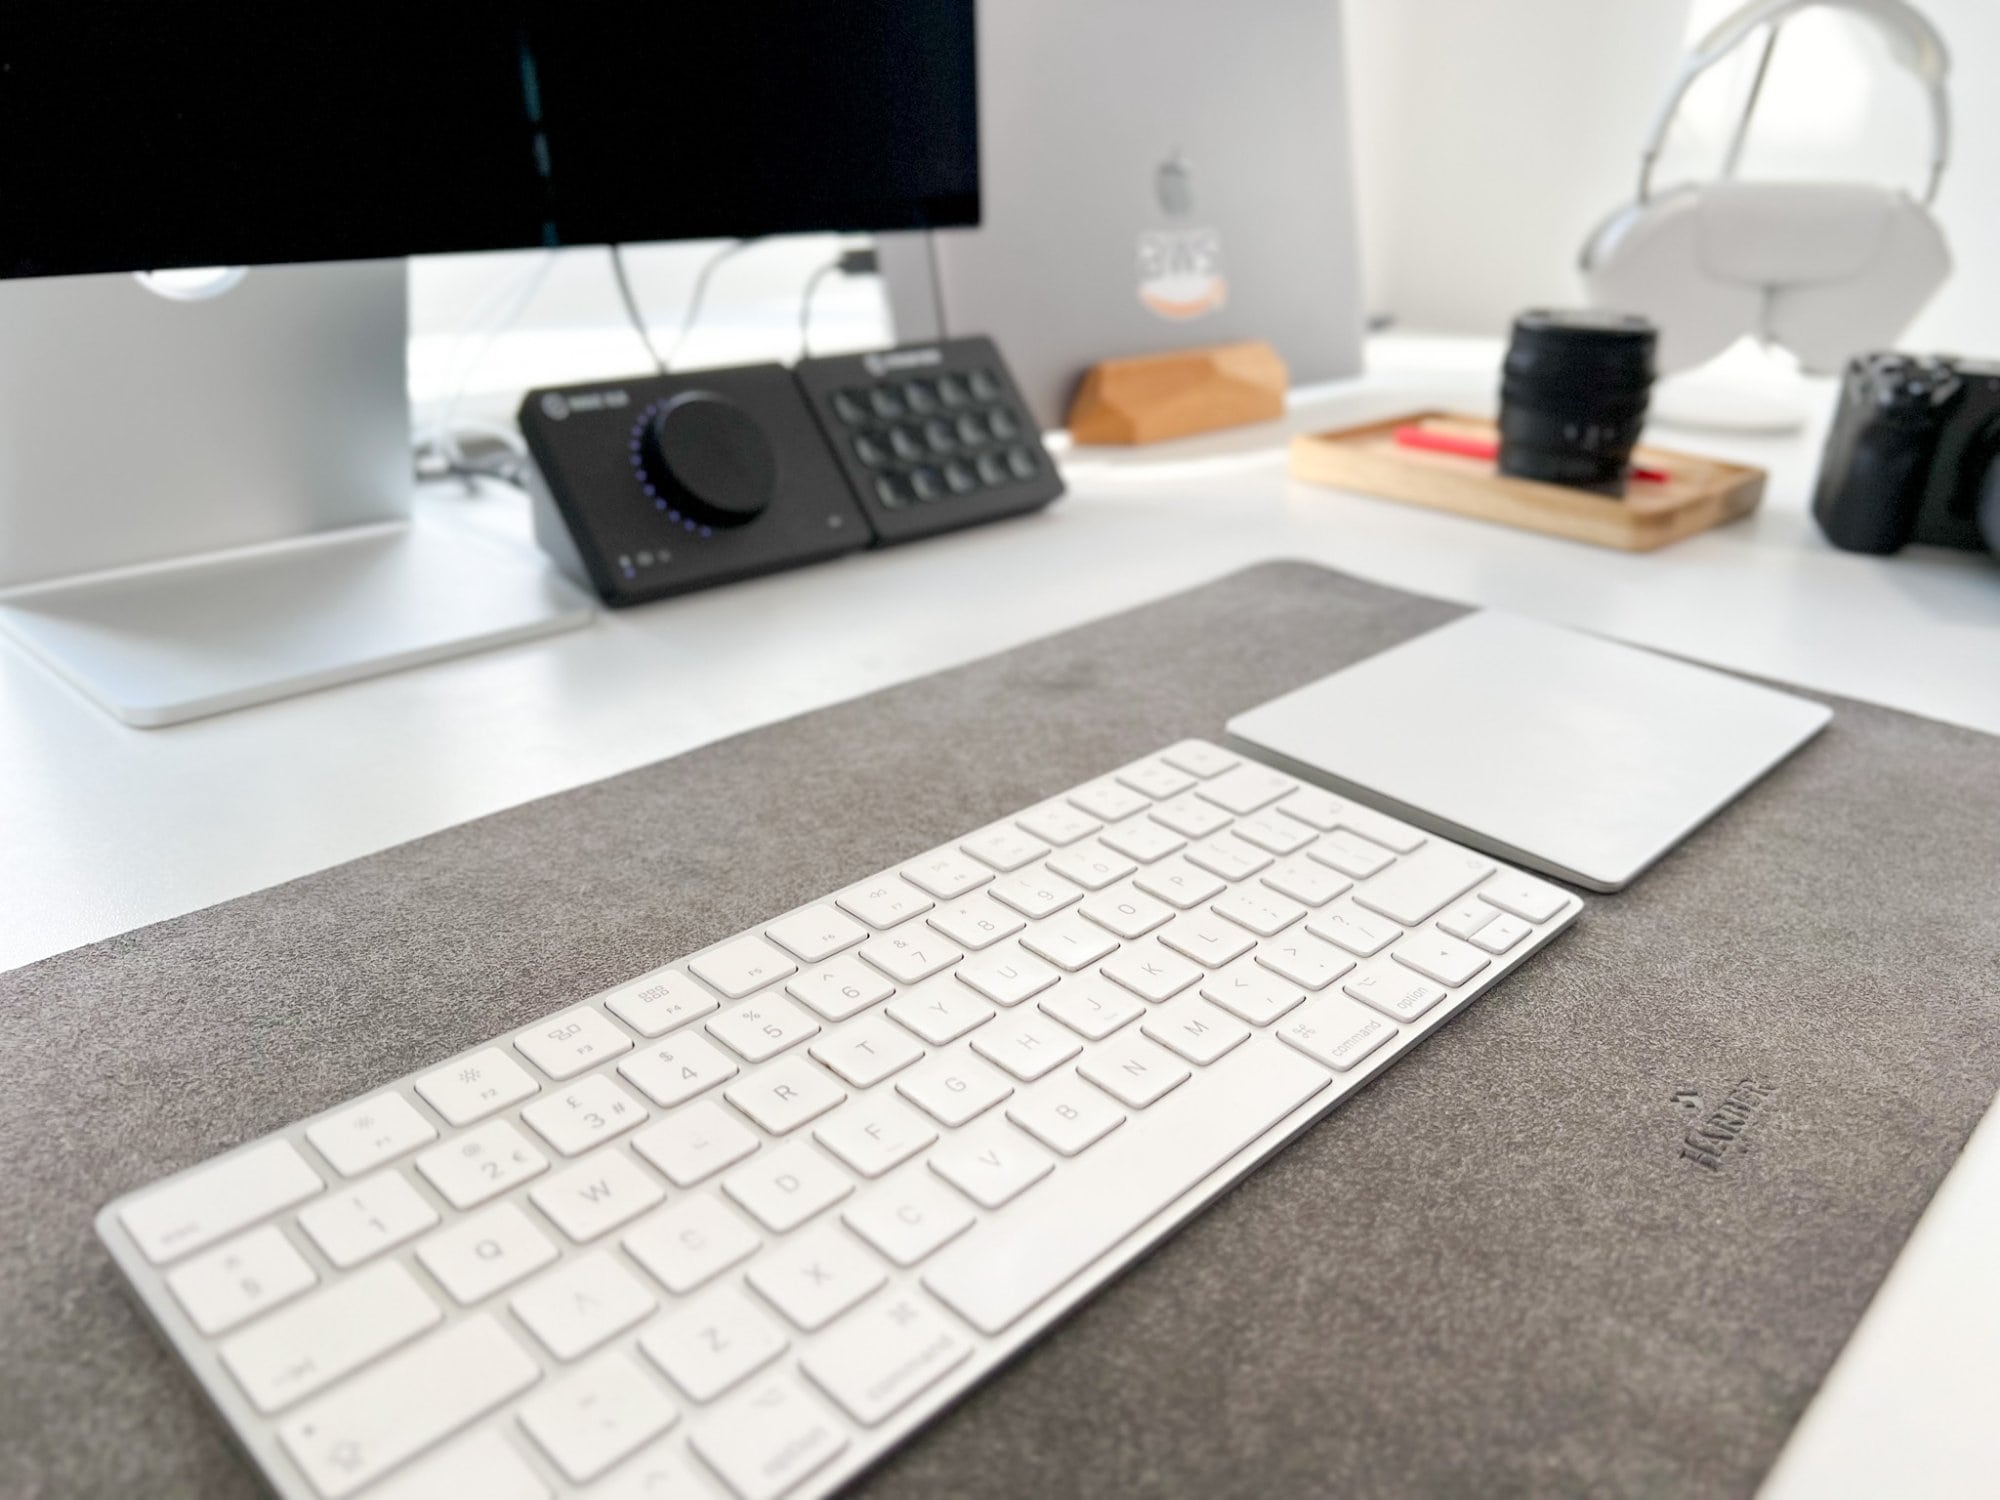 An Apple Magic keyboard and trackpad sitting on a Harber London microfibre desk mat